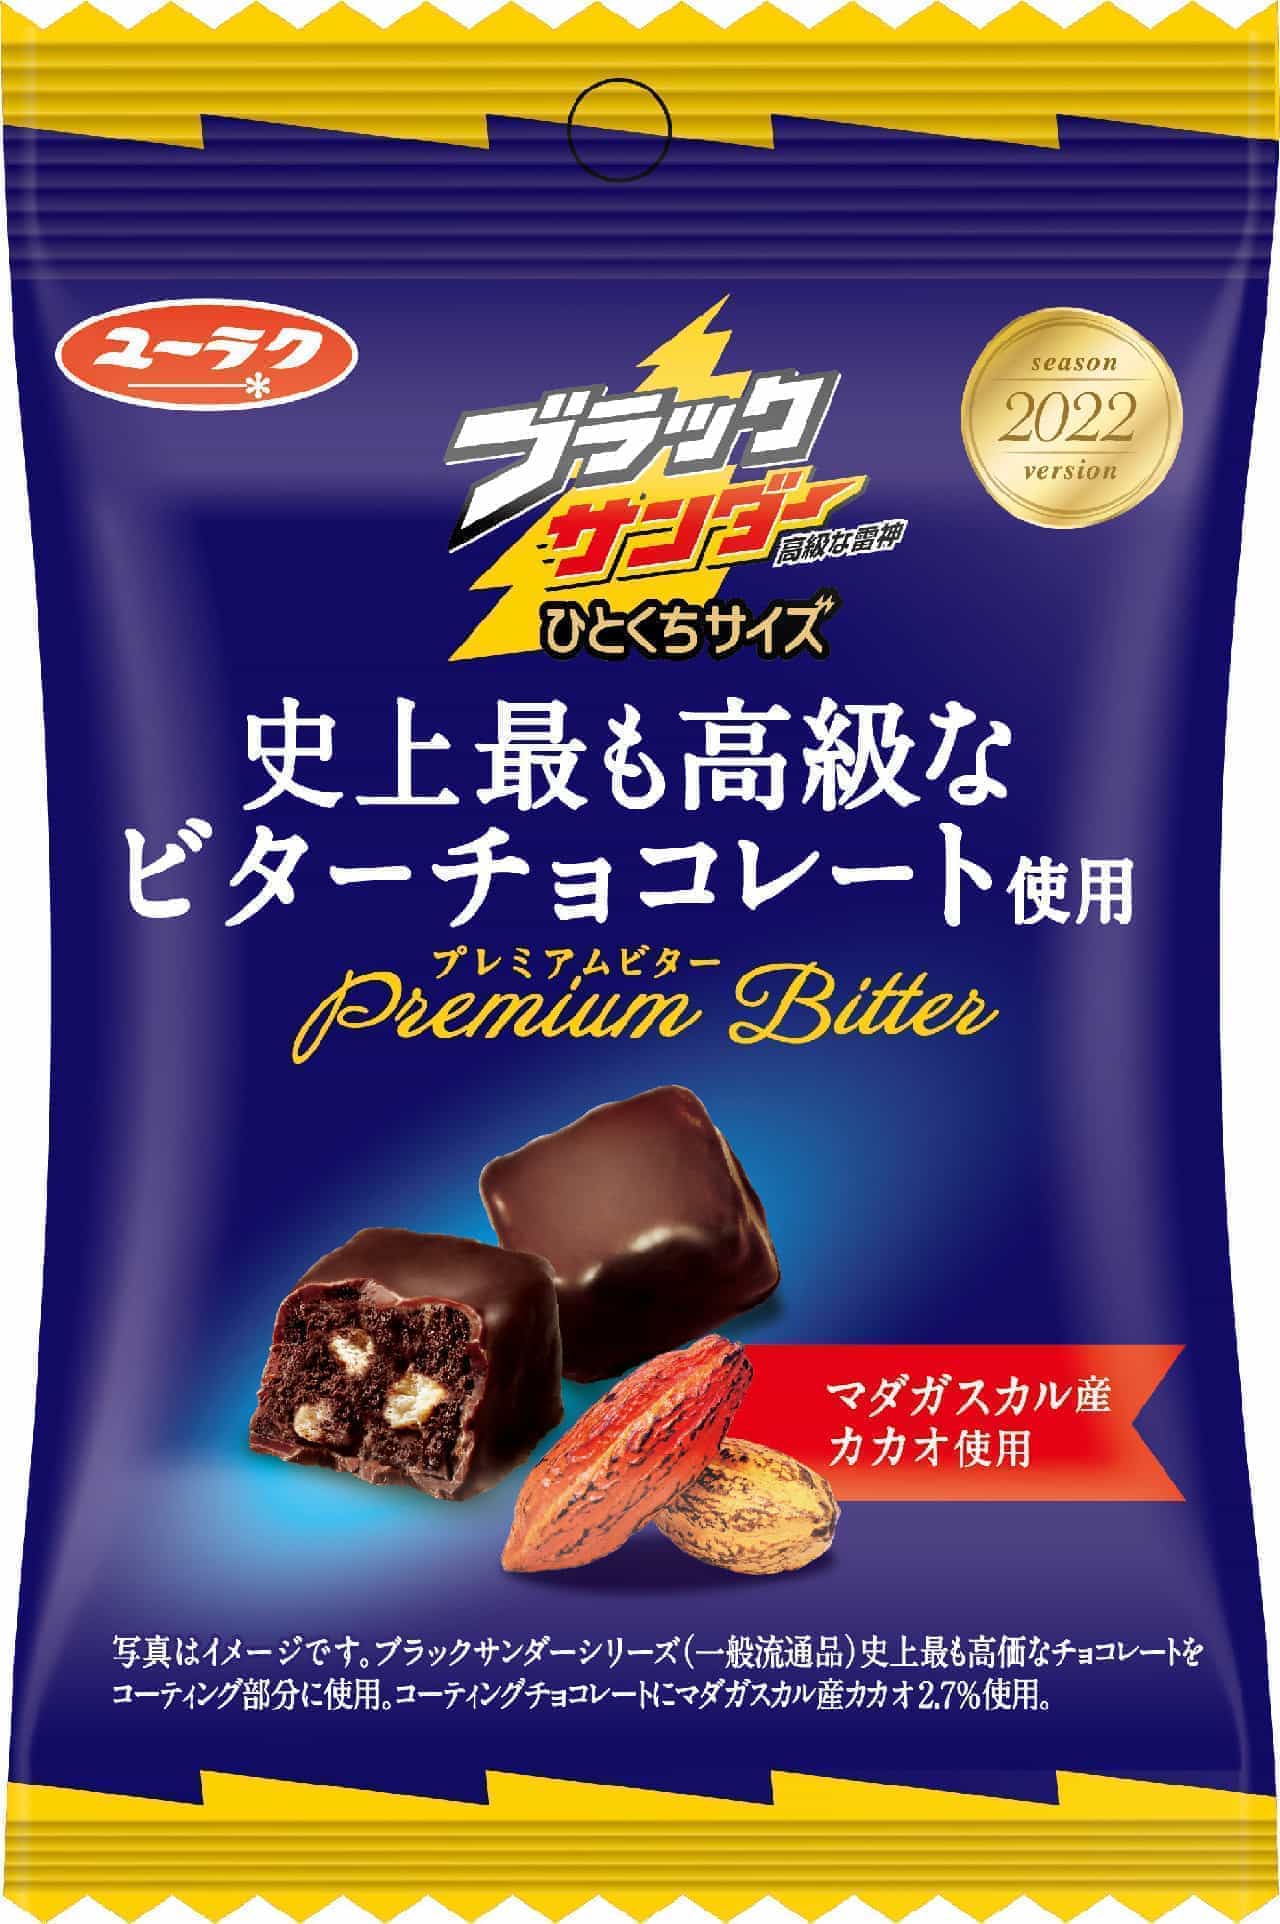 7-ELEVEN "Black Thunder's Most Luxury Bitter Chocolate in History"